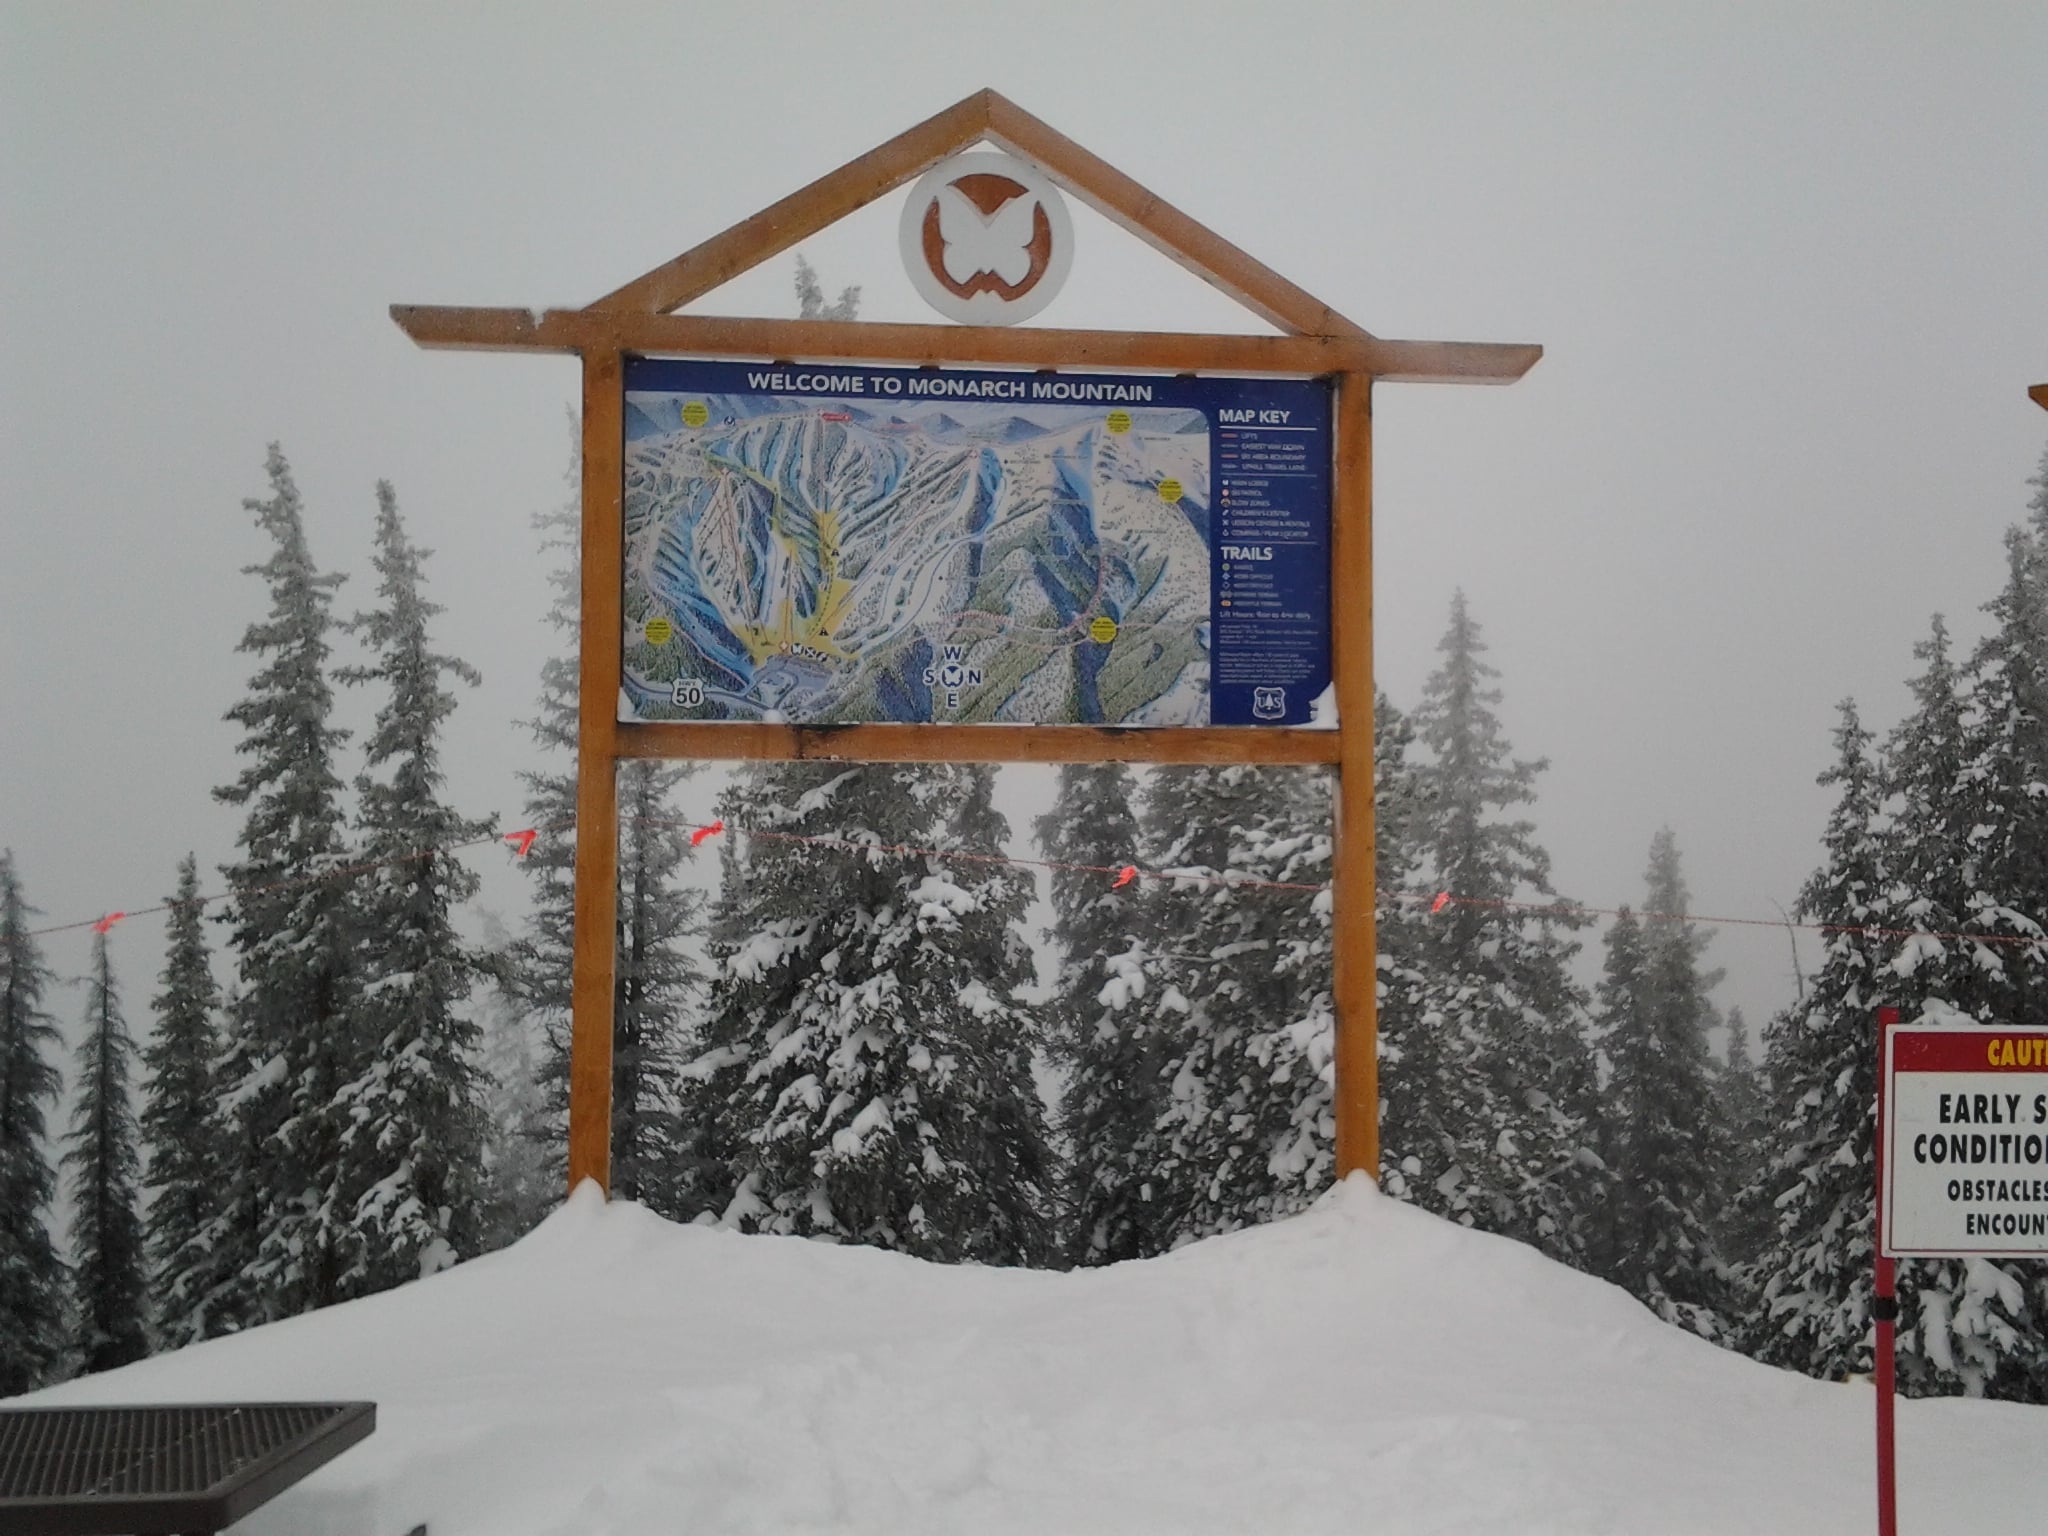 Large outdoor ski map at Monarch Mountain, on a cloudy and snowy day with pine trees covered in snow.